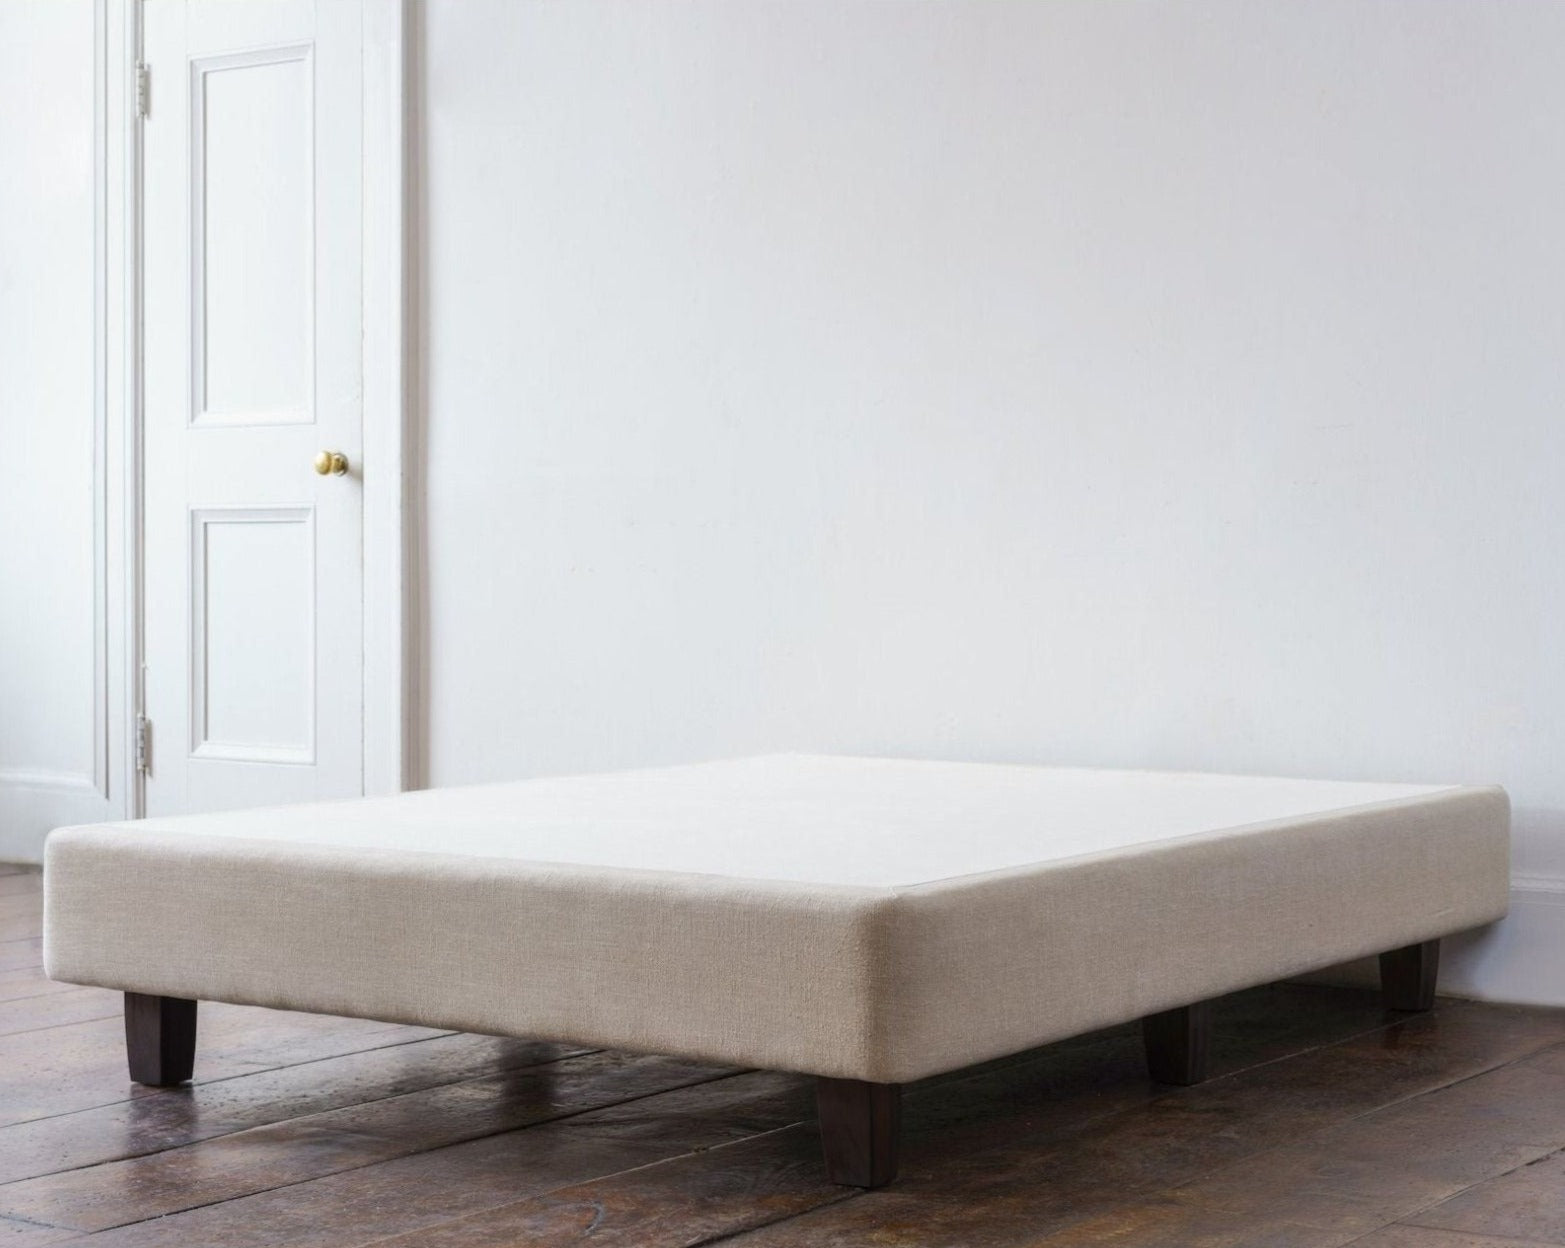 For perfect support for your mattress, Resthouse Sleep Solutions offers Designer Package Foundations by Obasan.